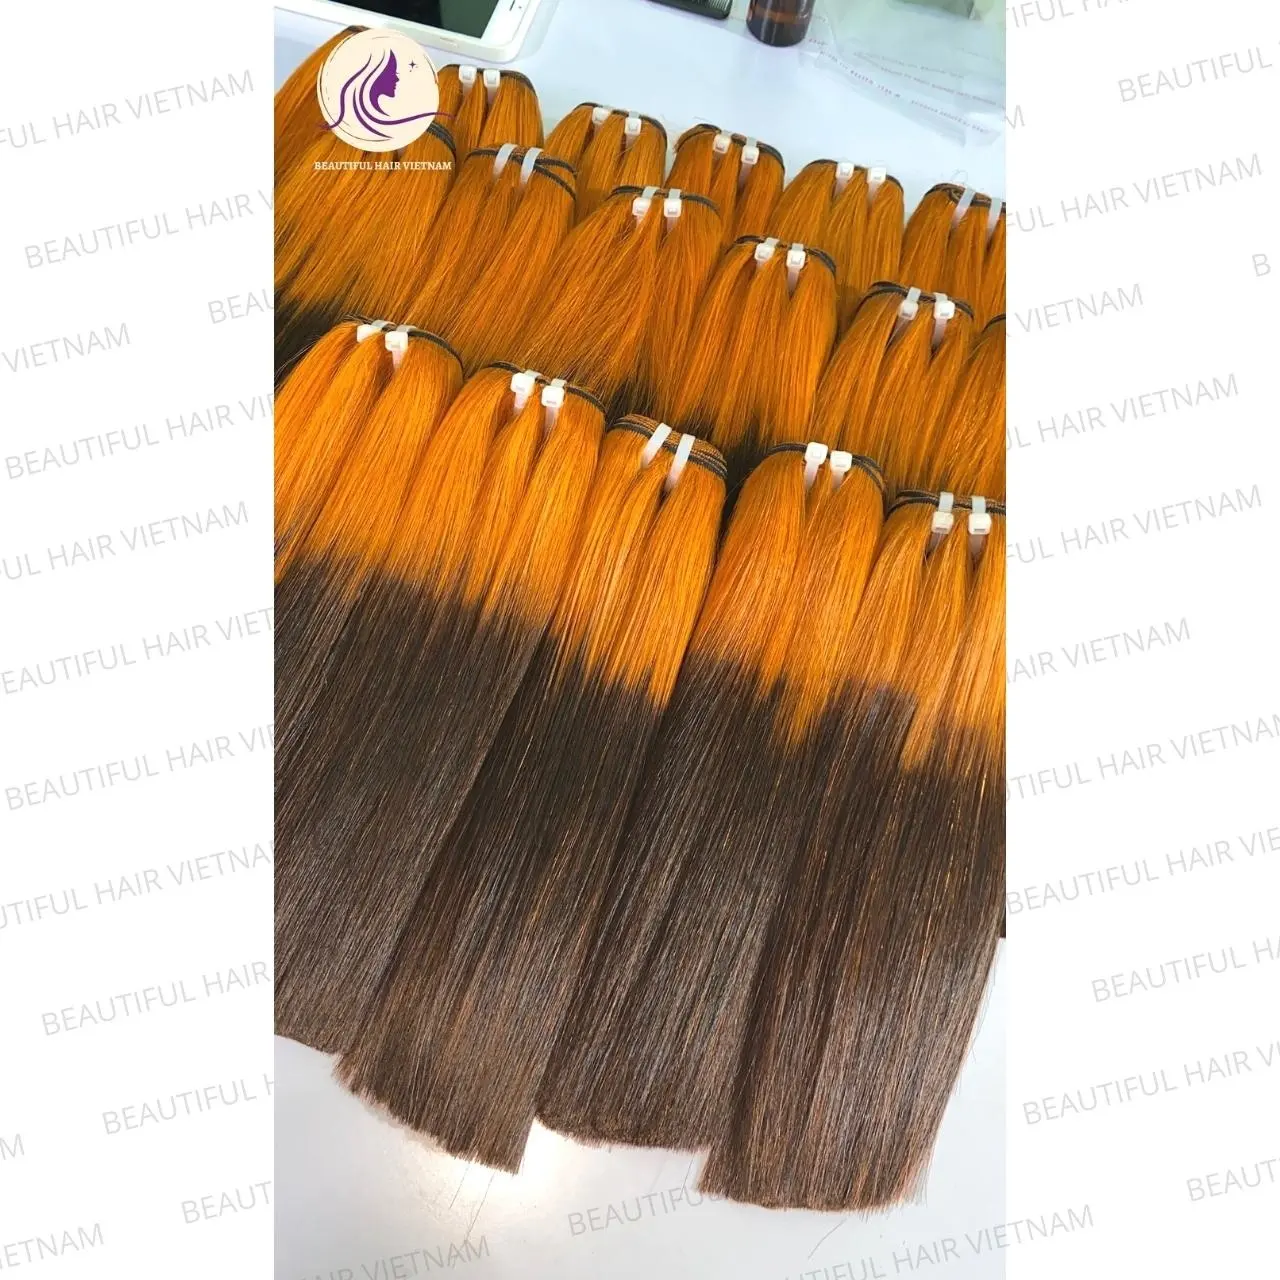 The Best Texture Good Price High Quality Vietnamese Hair Vendor, Wet and Wavy Bulk, Double Drawn Human Hair Extensions